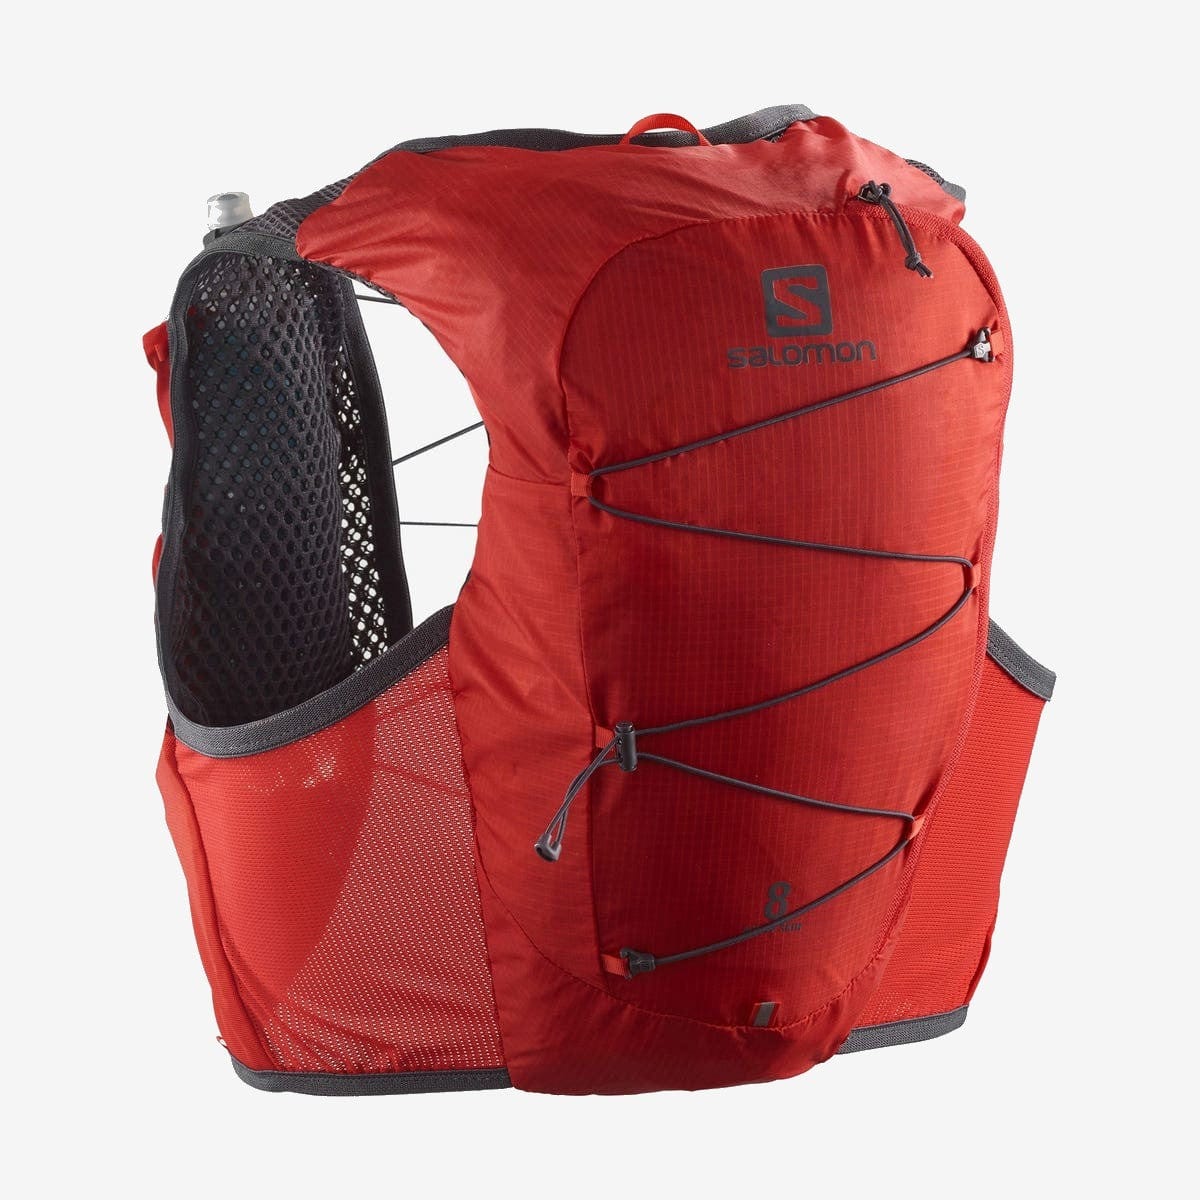 Salomon Active Skin 8 Set with Flasks - Fiery Red